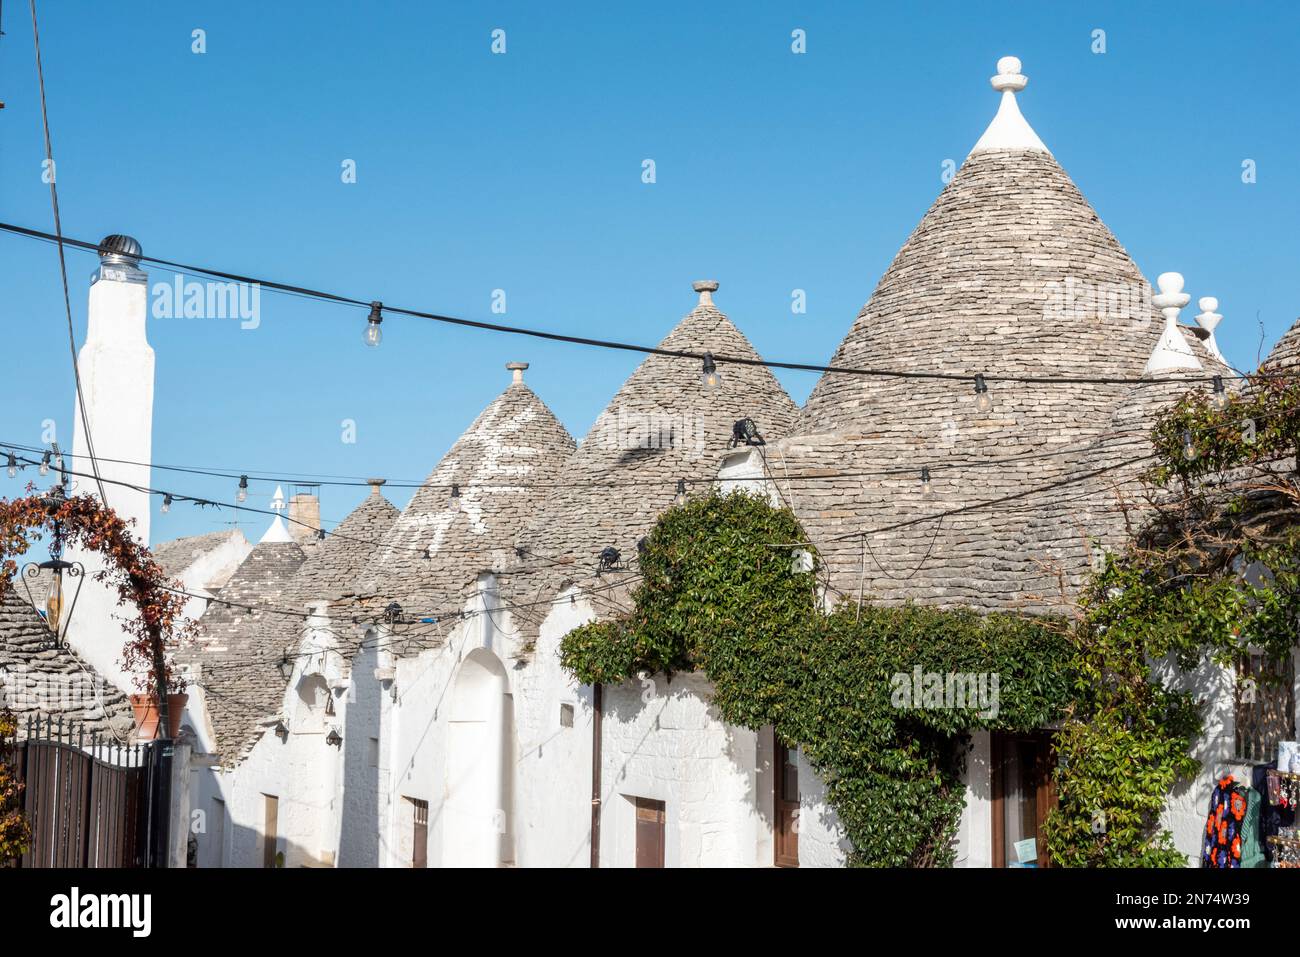 Iconic residential houses in historic Trulli district in Alberobello, Italy Stock Photo